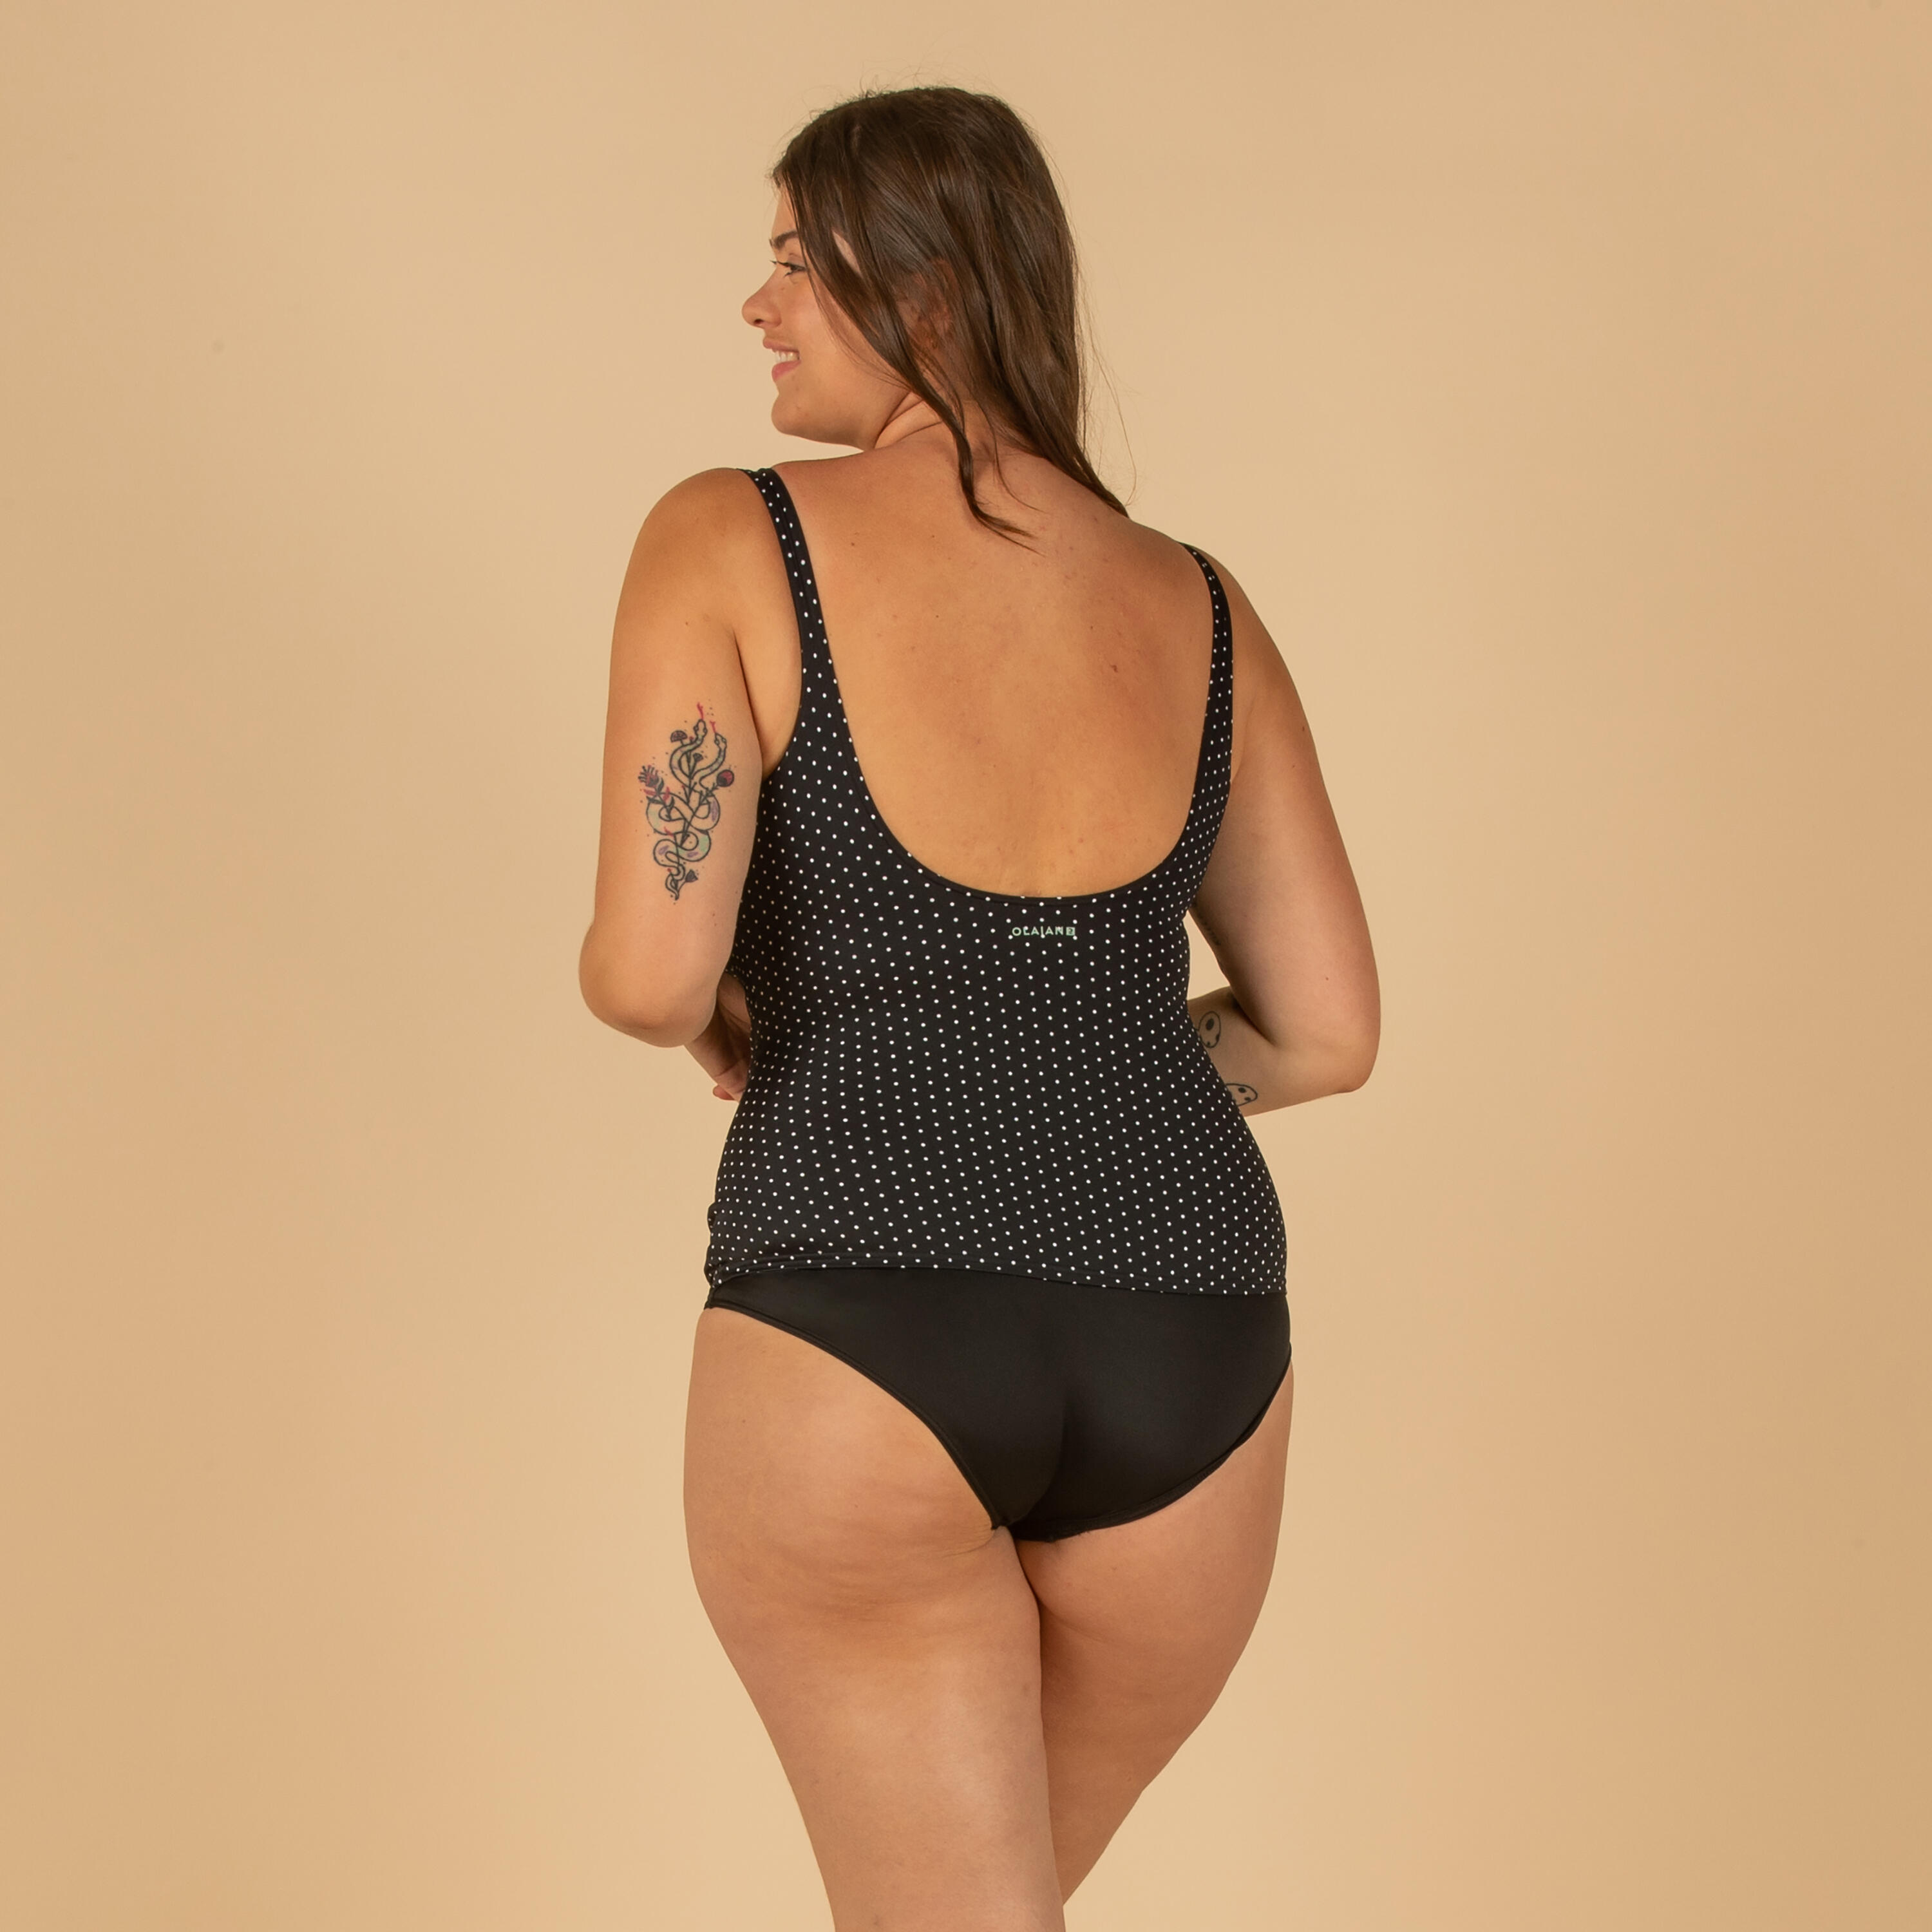 Body Sculpting Black Long Sleeve Scoop Neck One Piece Swimsuit / Bodysuit  in Crinkle Stretch -  Canada